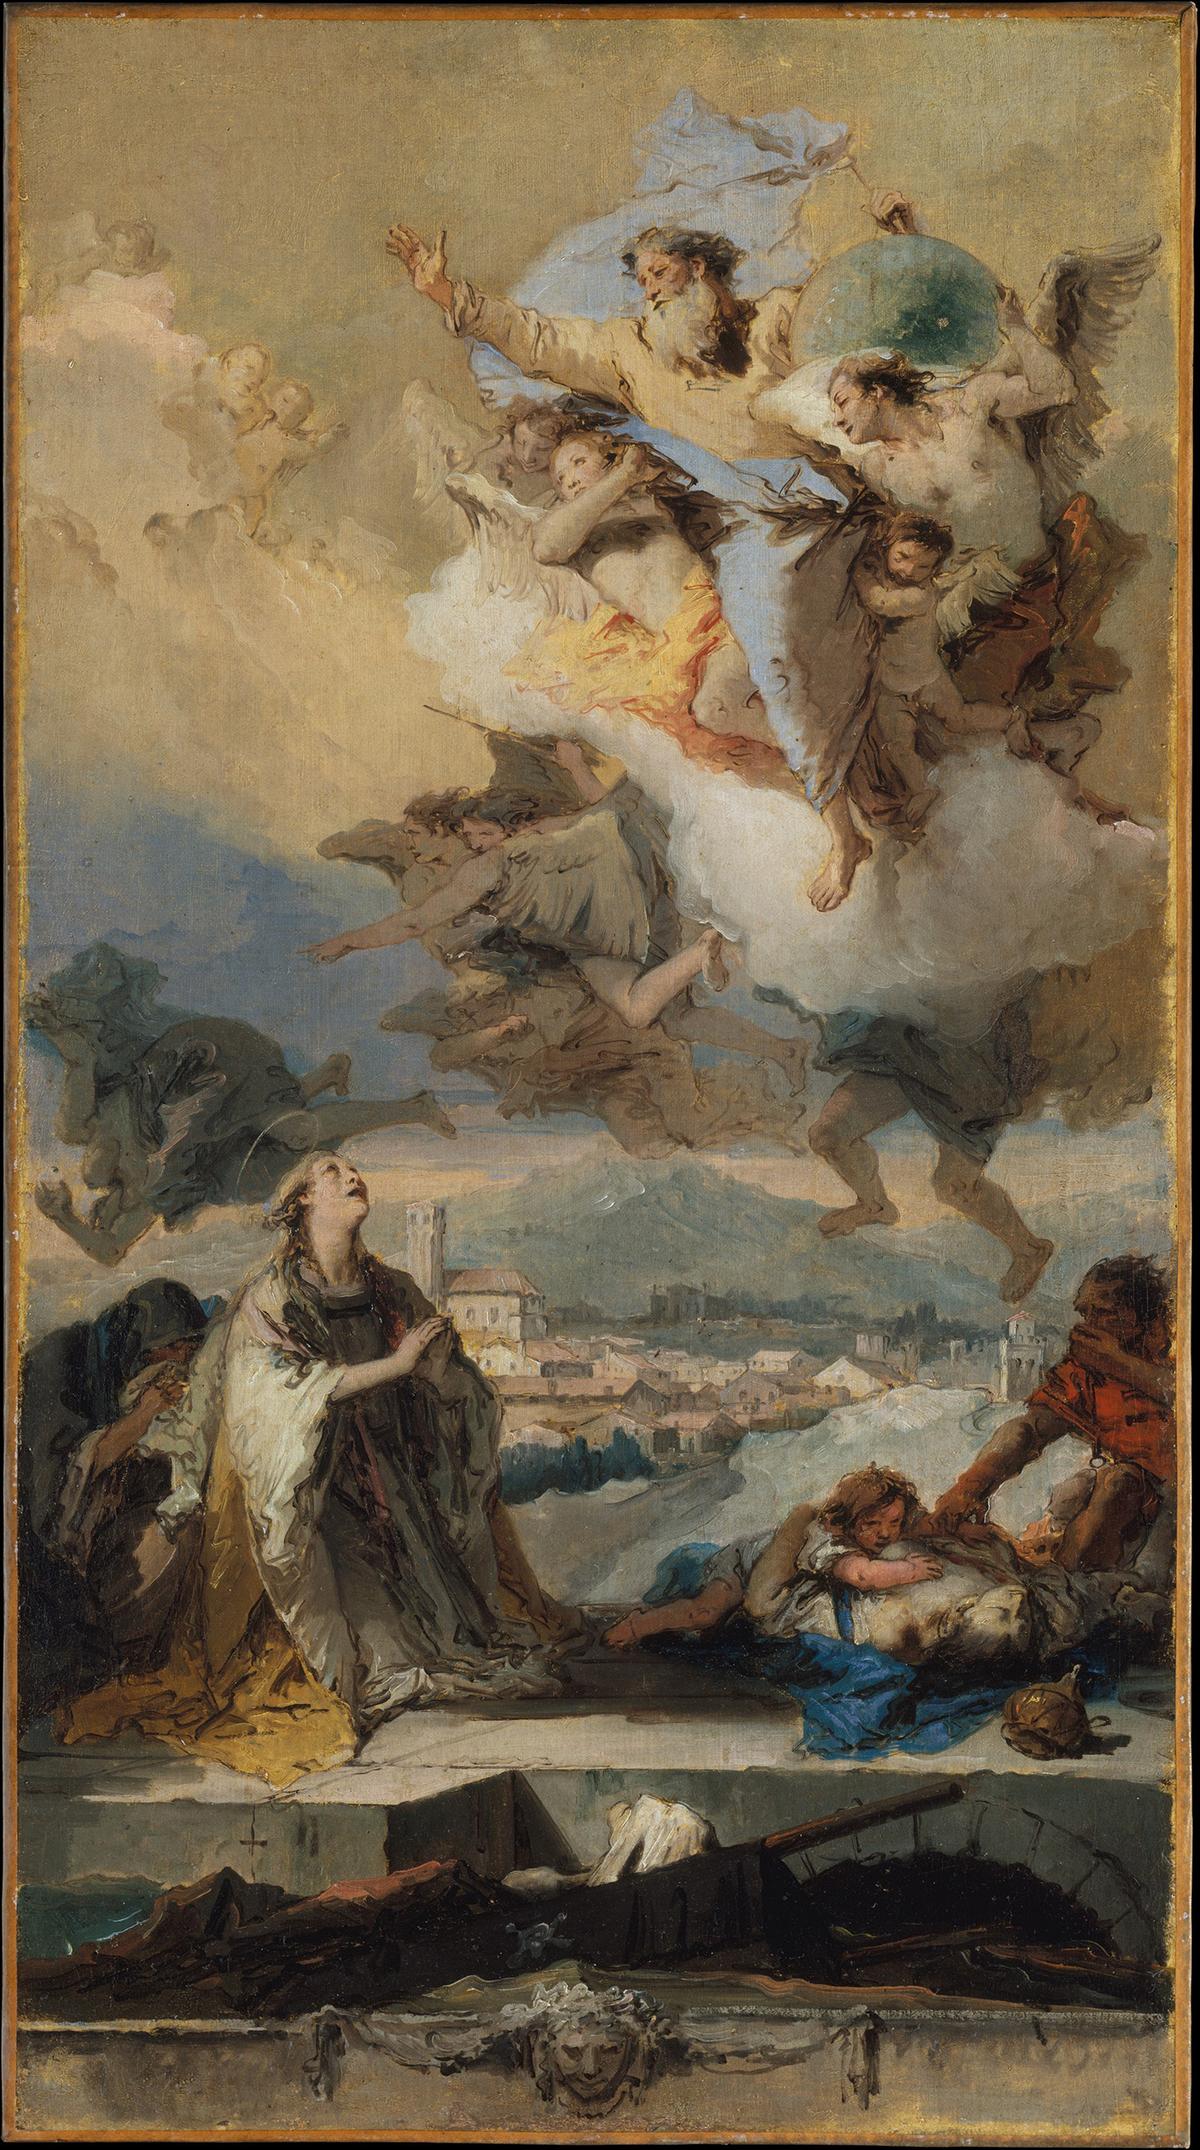 Hope is a word associated with spiritual intervention. "Saint Thecla Praying for the Plague-Stricken," circa 1758–1759, by Giovanni Battista Tiepolo. Oil on canvas. Metropolitan Museum of Art, New York. (Public Domain)